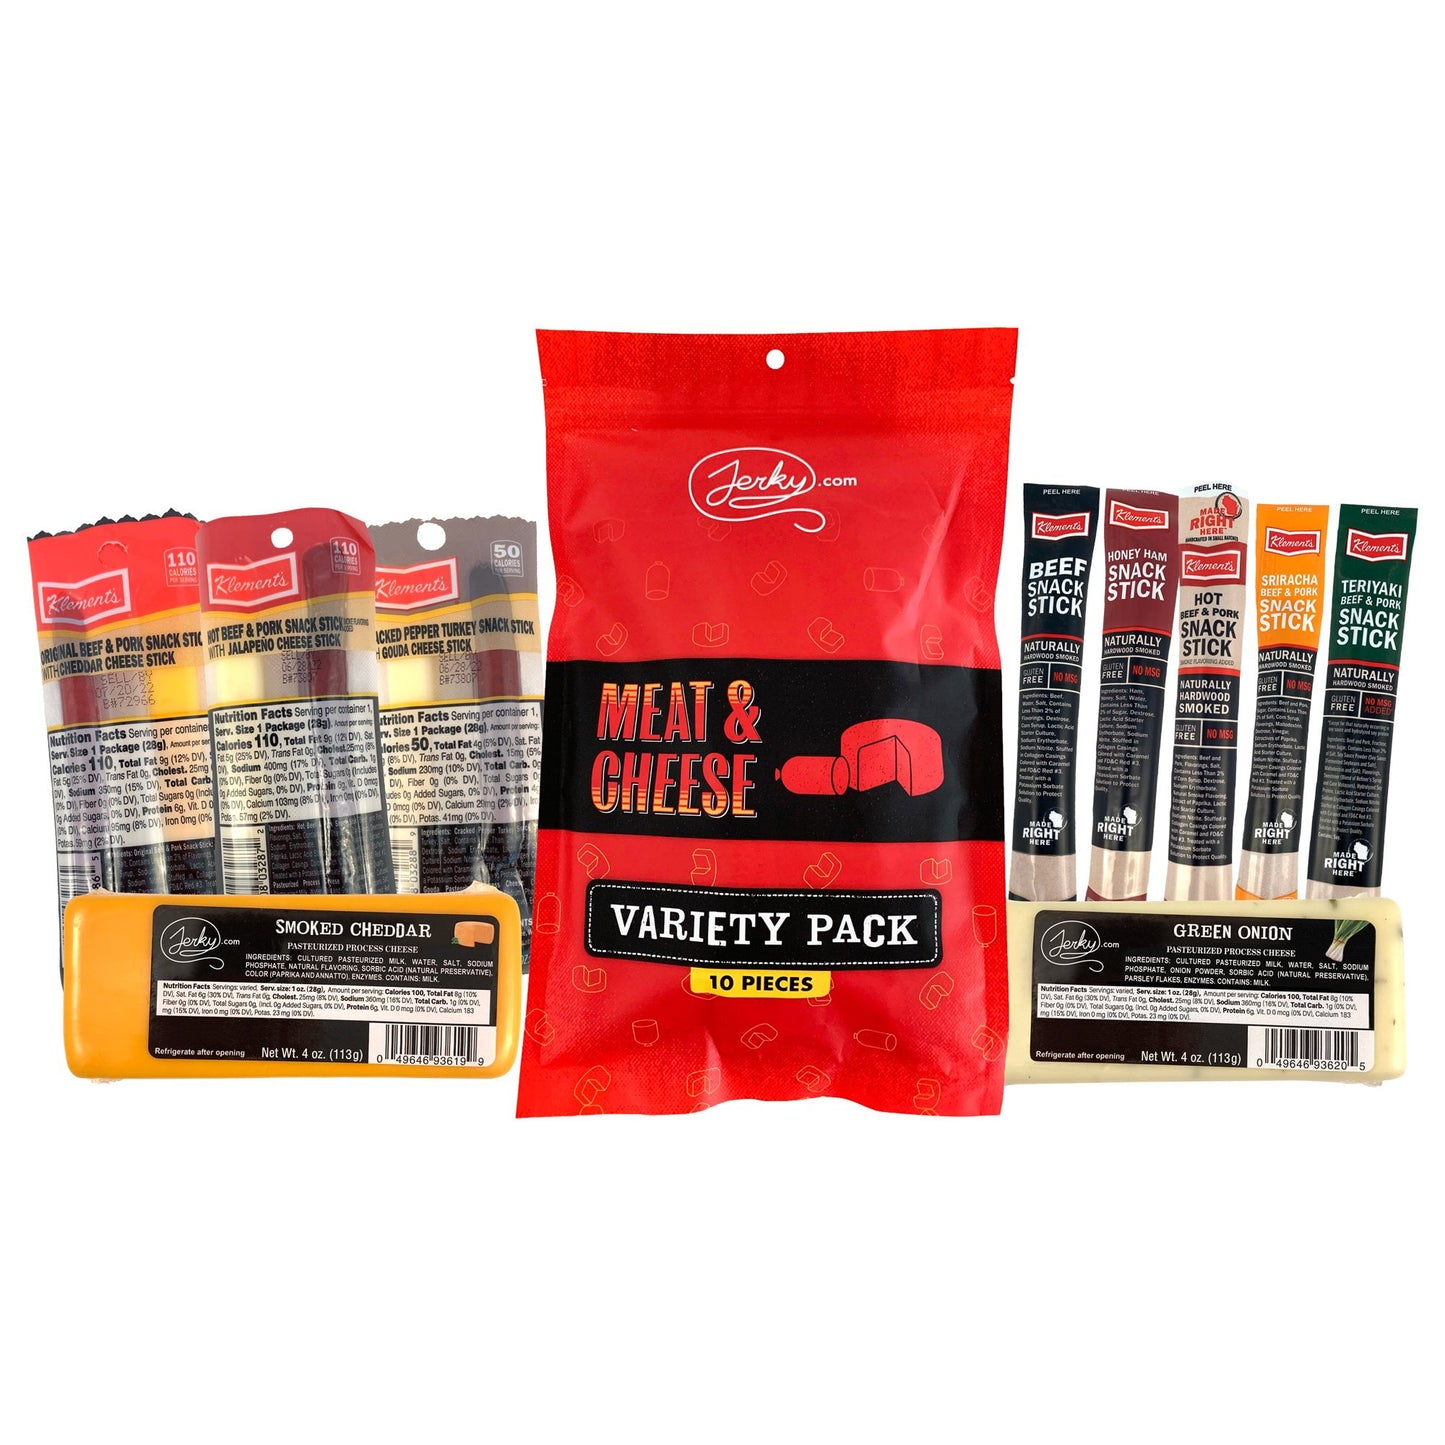 Meat & Cheese Variety Pack - 10 Pieces by Jerky.com